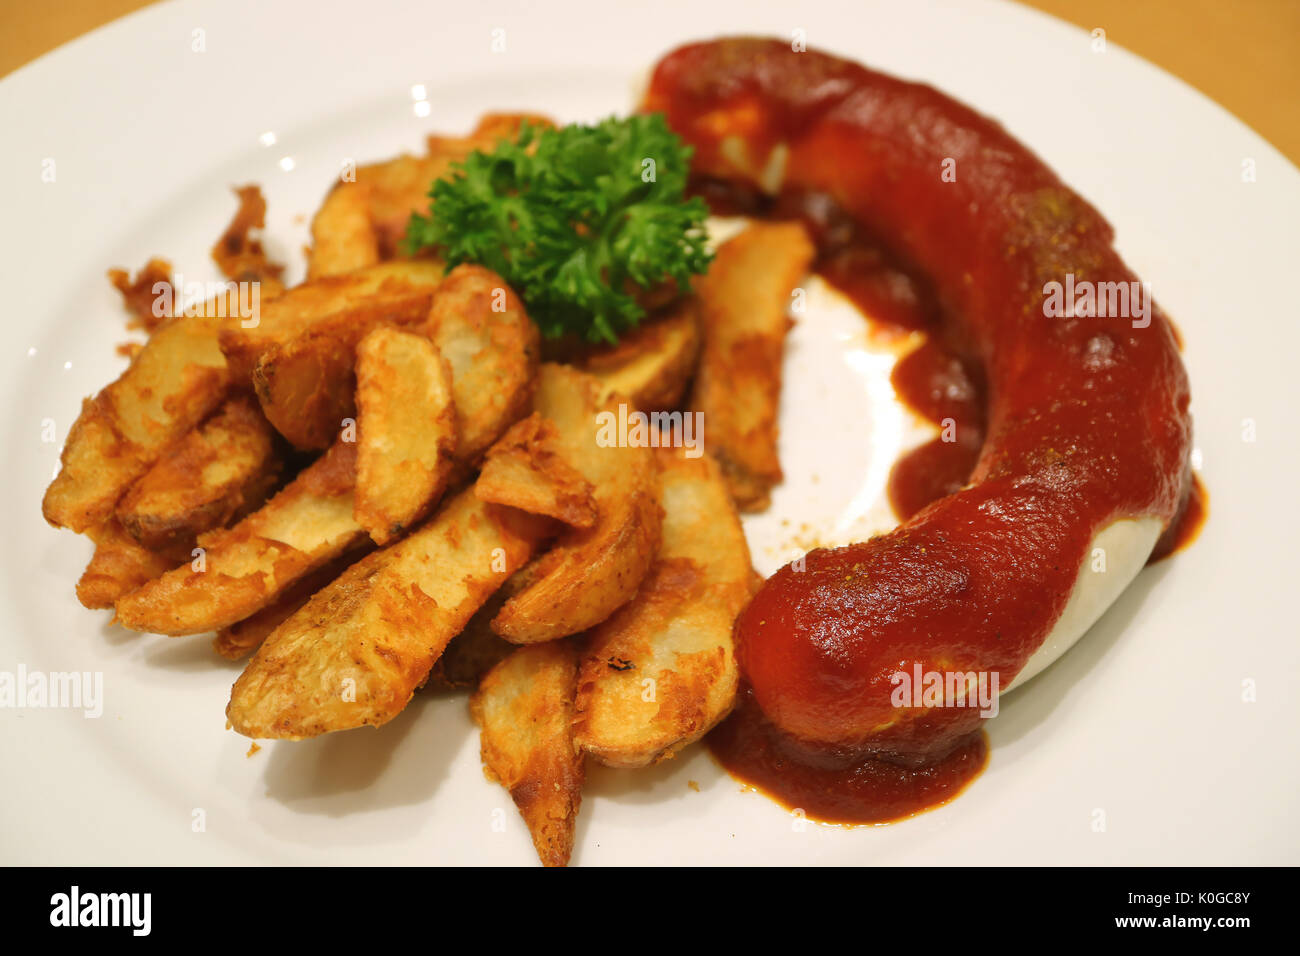 German Weisswurst Sausage with Curry Ketchup and Fried Potatoes Stock Photo